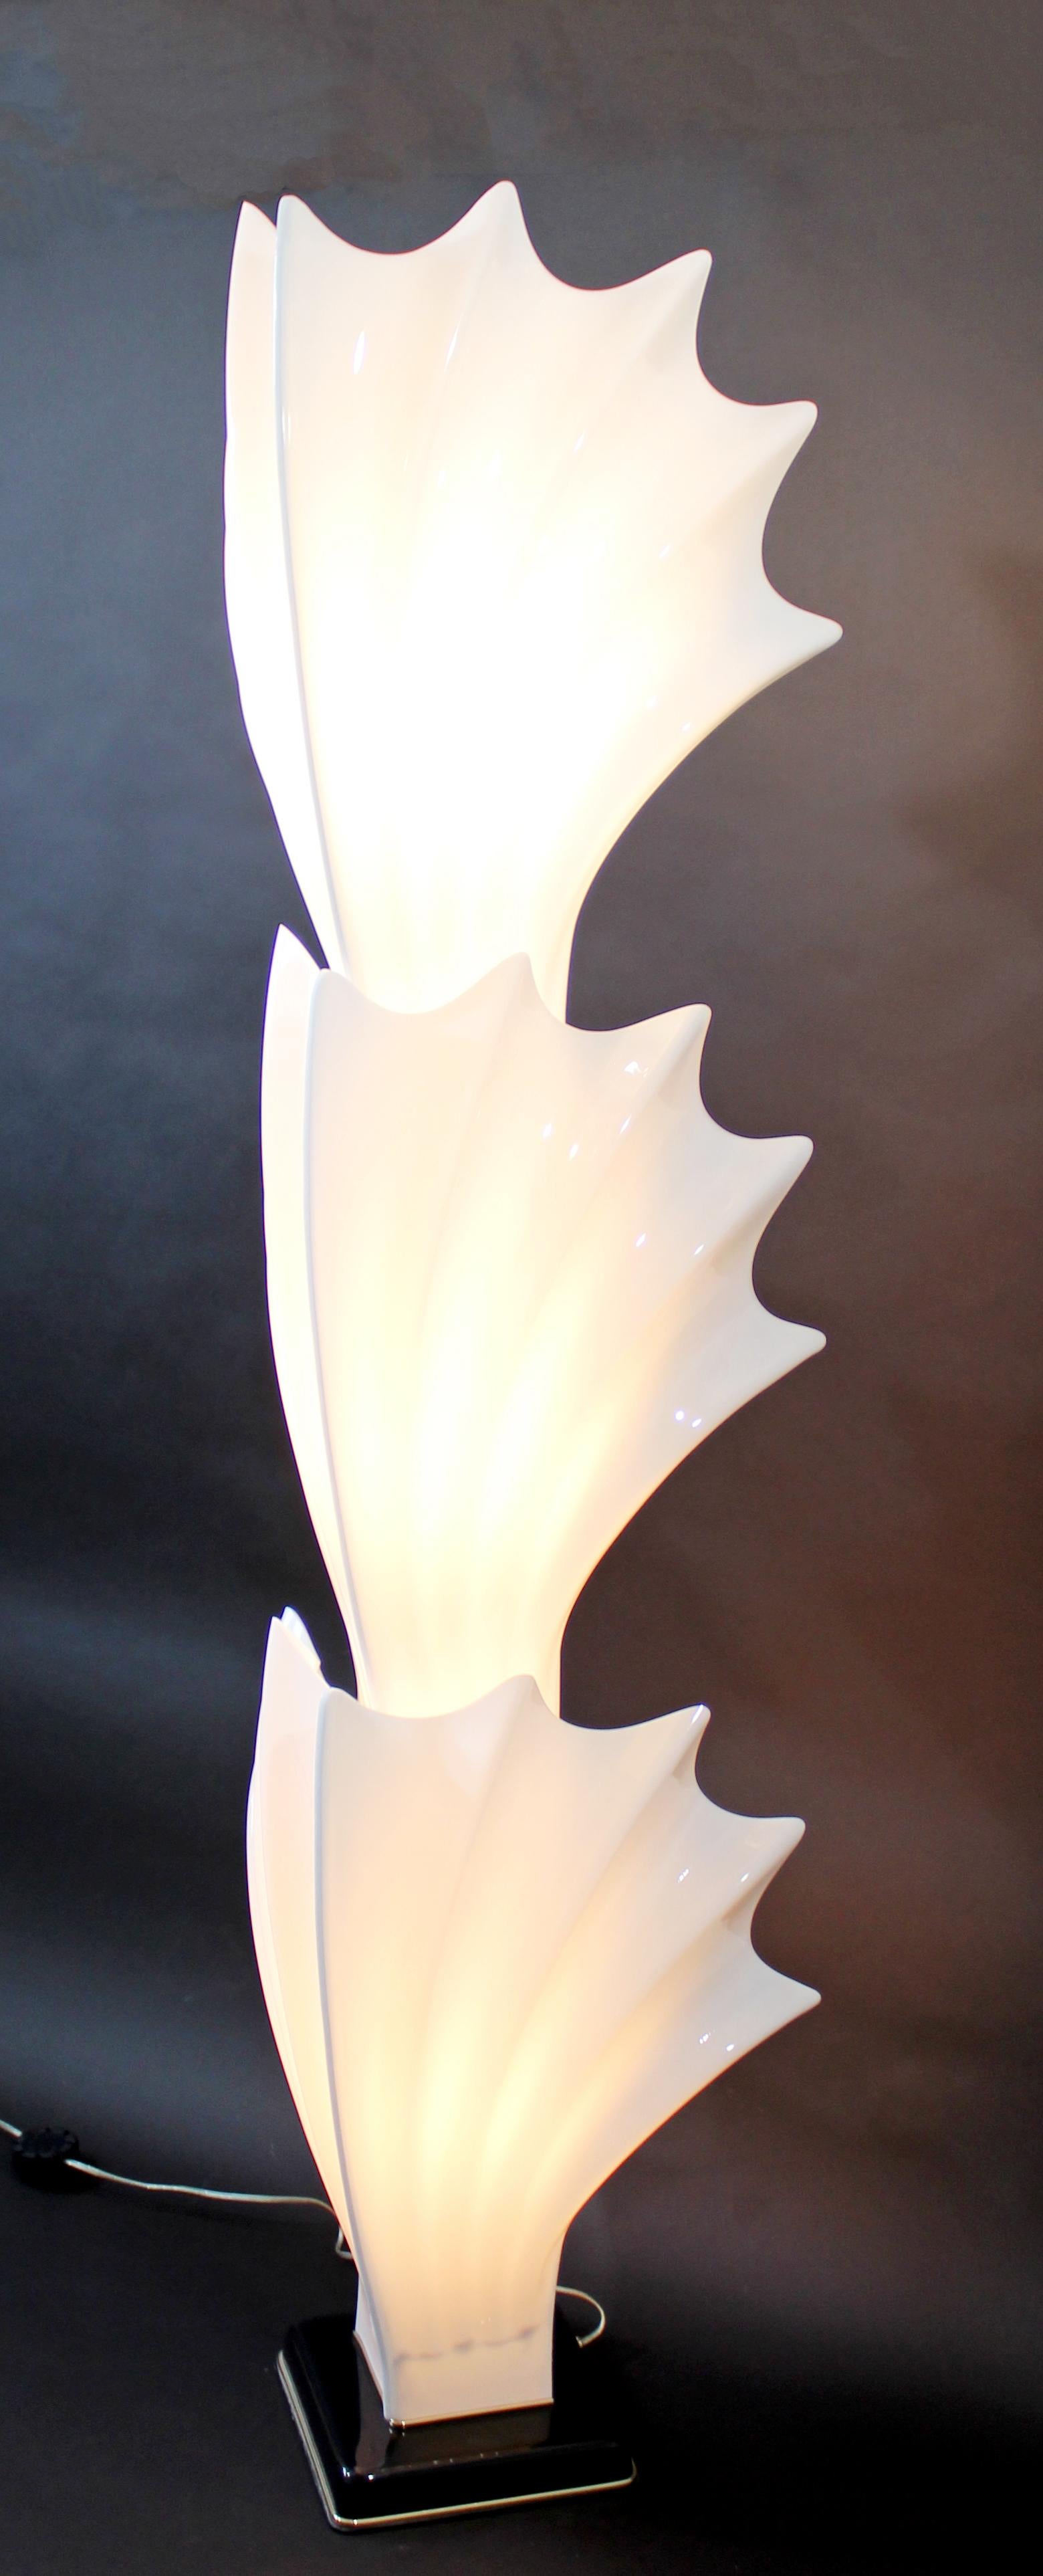 Canadian Contemporary Modern White Rougier Floor Lamp 1980s Molded Acrylic Shells Leaves